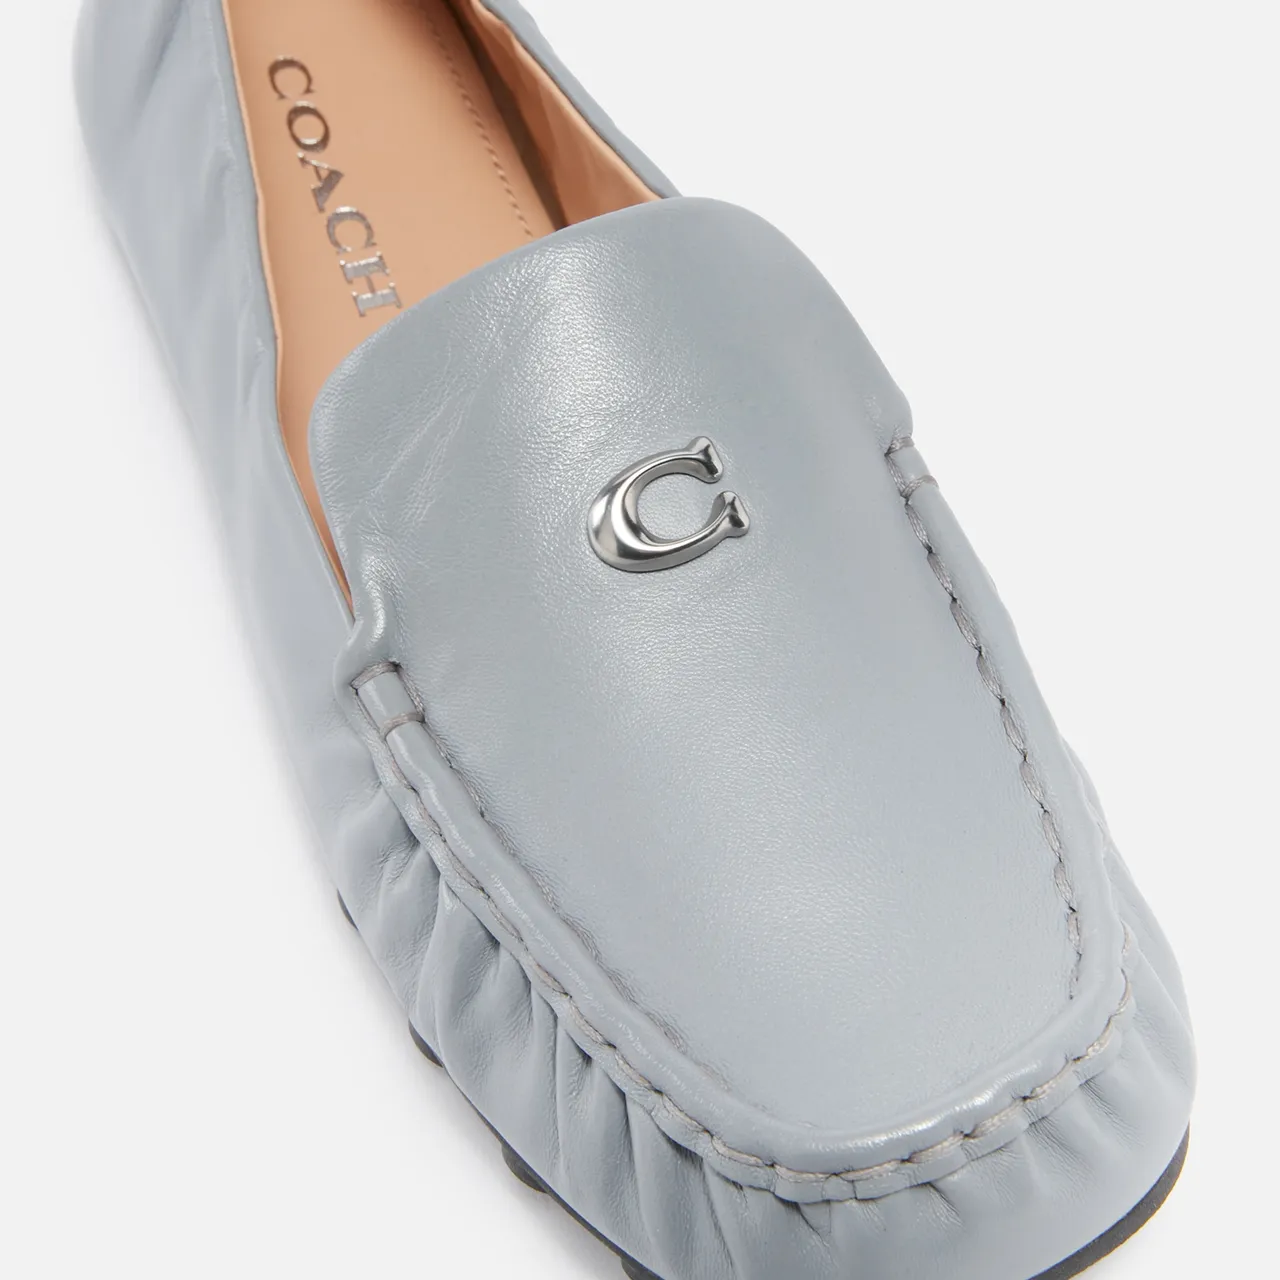 Coach Women's Ronnie Leather Loafers